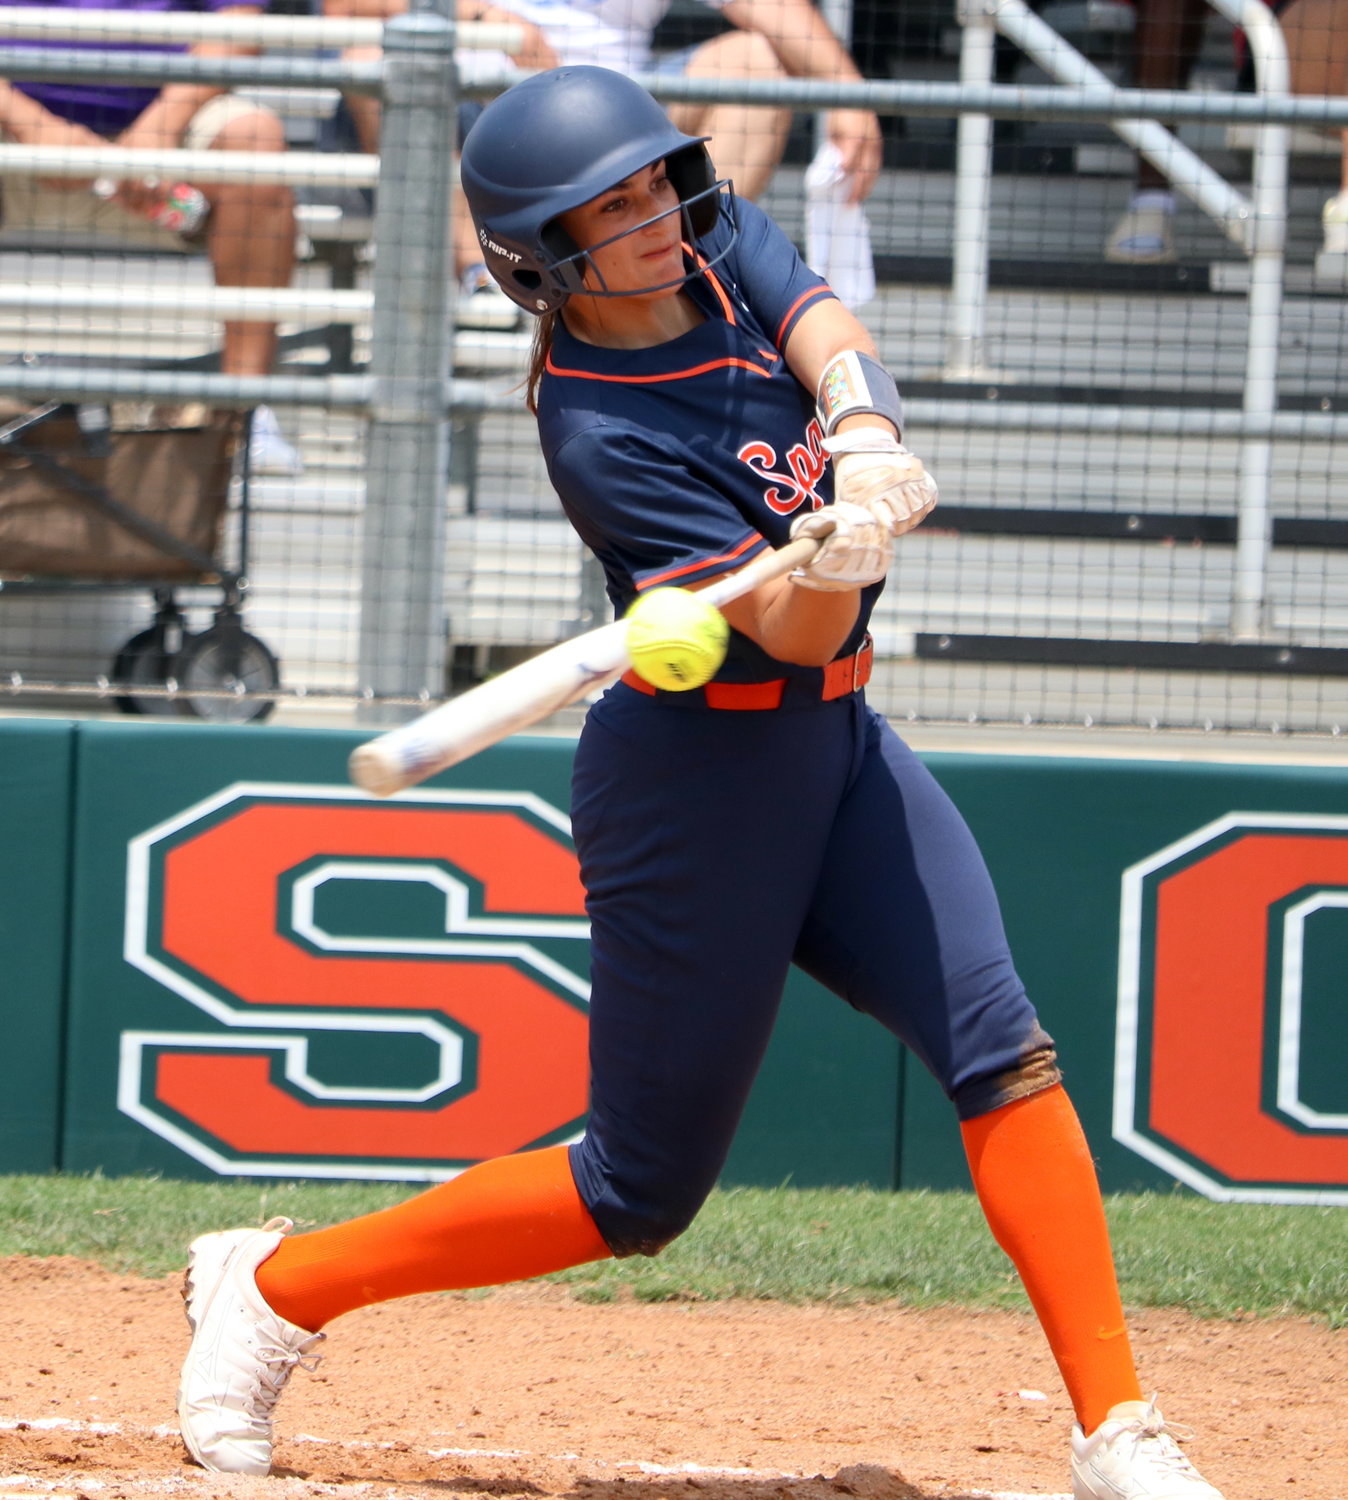 Meghan Kelly hits during Saturday’s area round game between Seven Lakes and Jersey Village at Seven Lakes.